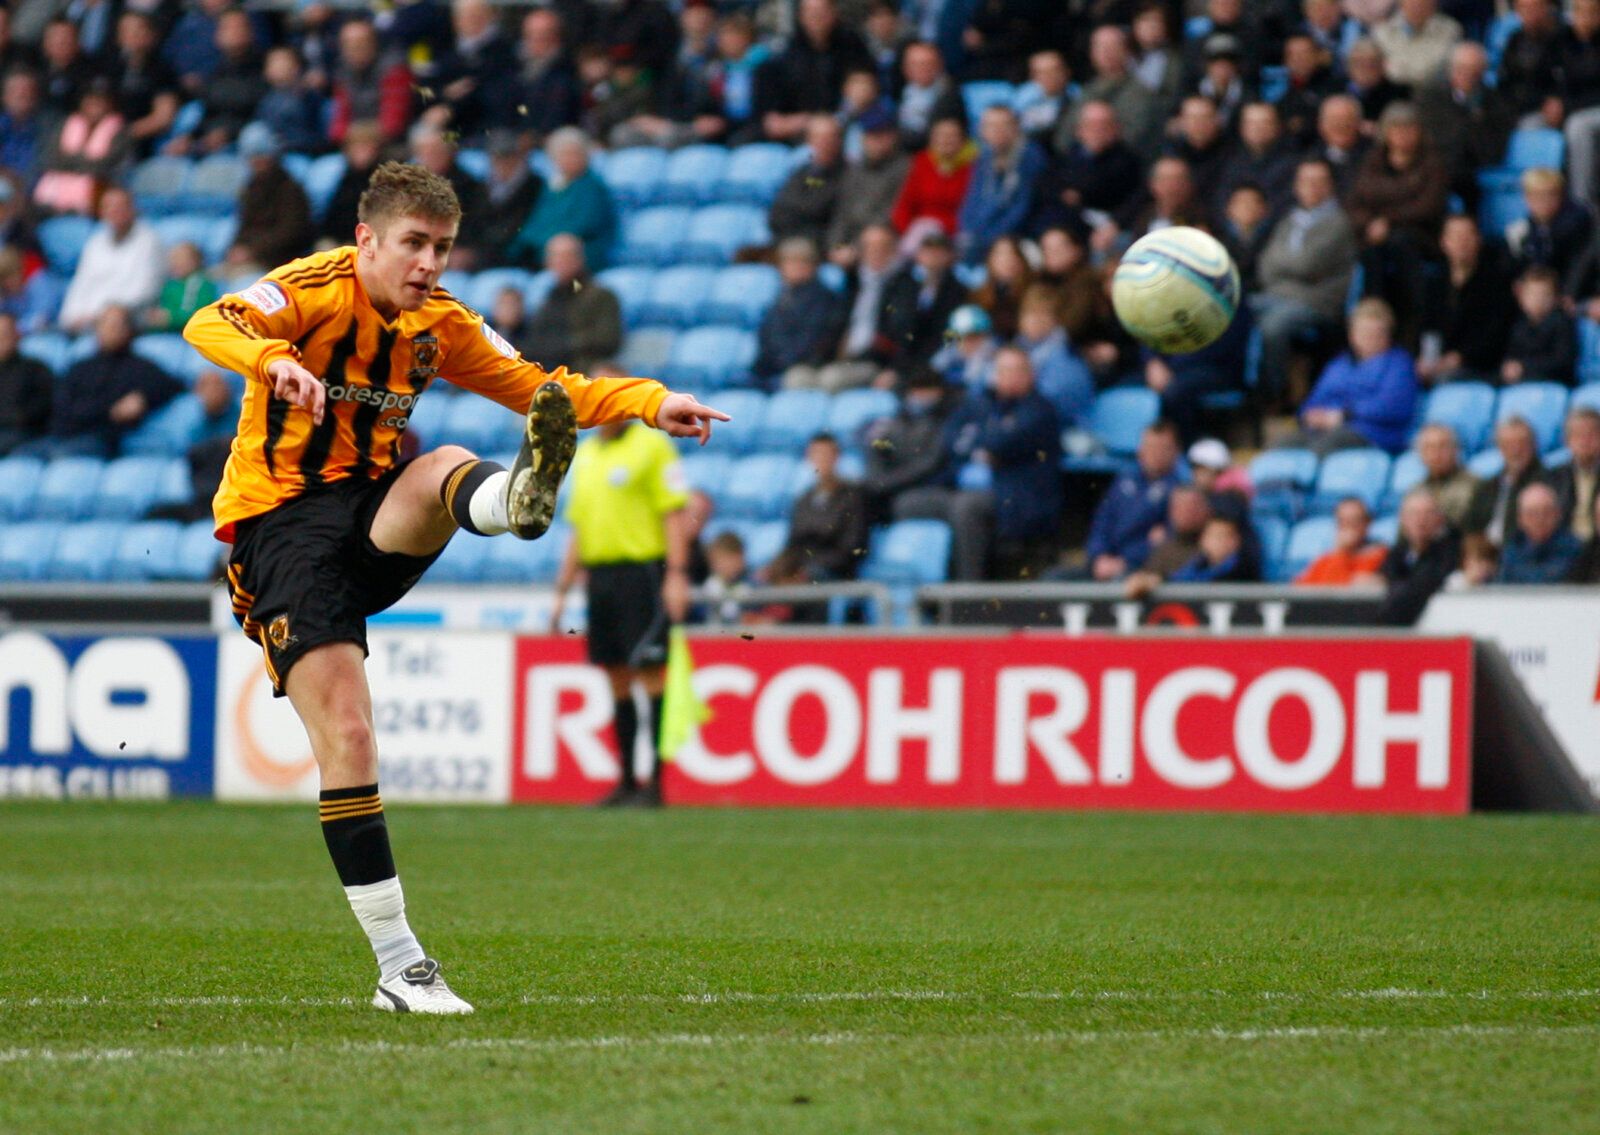 Football - Coventry City v Hull City - npower Football League Championship - Ricoh Arena - 10/11 - 12/3/11 
Tom Cairney - Hull City 
Mandatory Credit: Action Images / Paul Harding